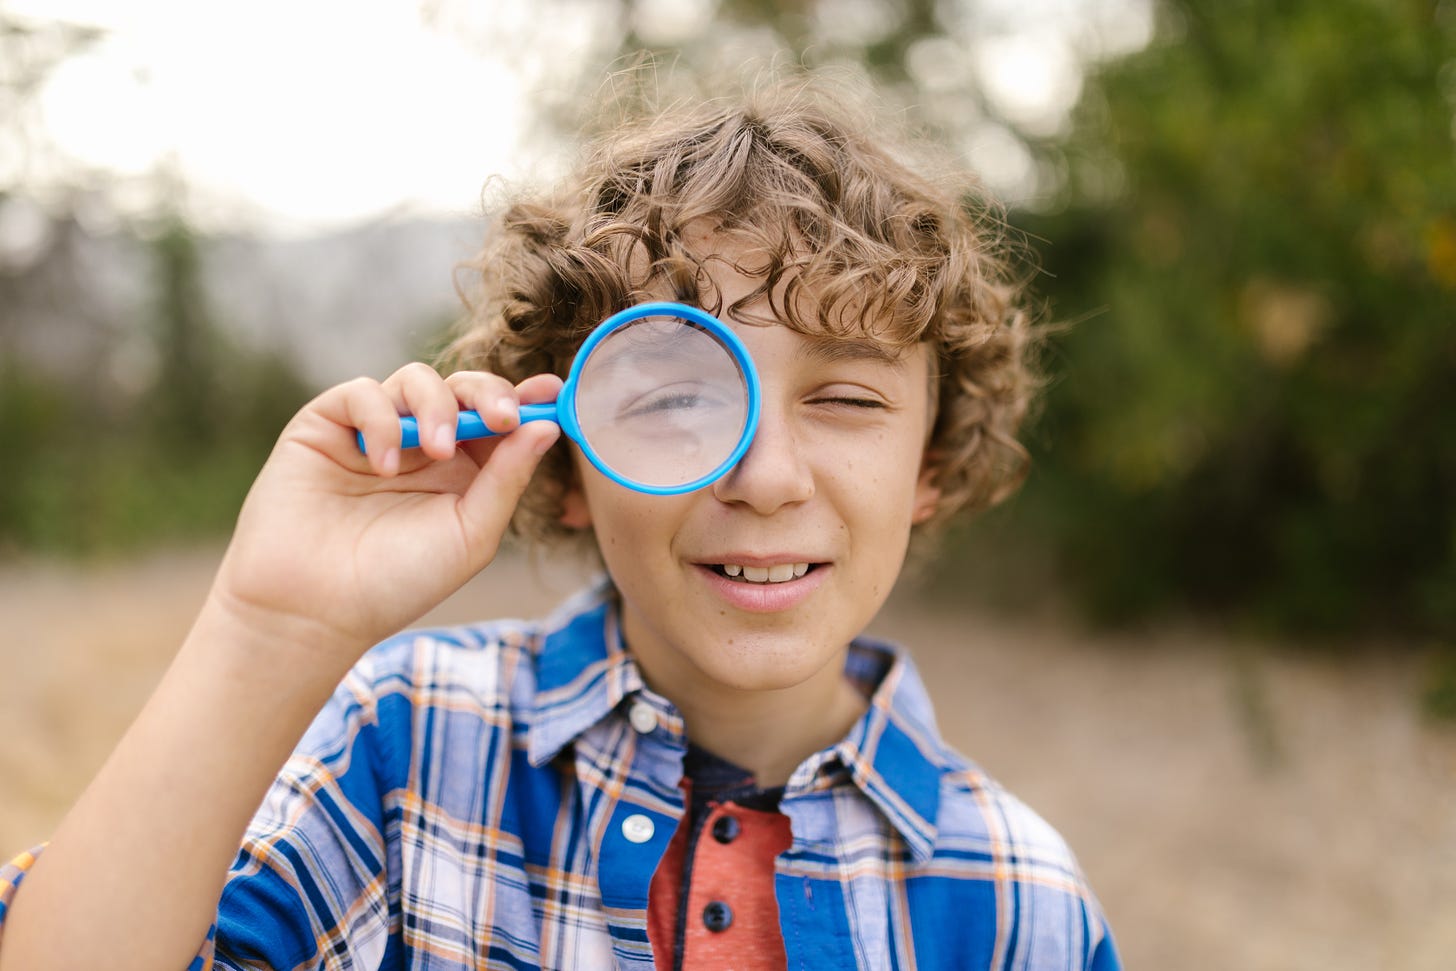 Boy with brown curly hair looking through a blue magnifying glass.